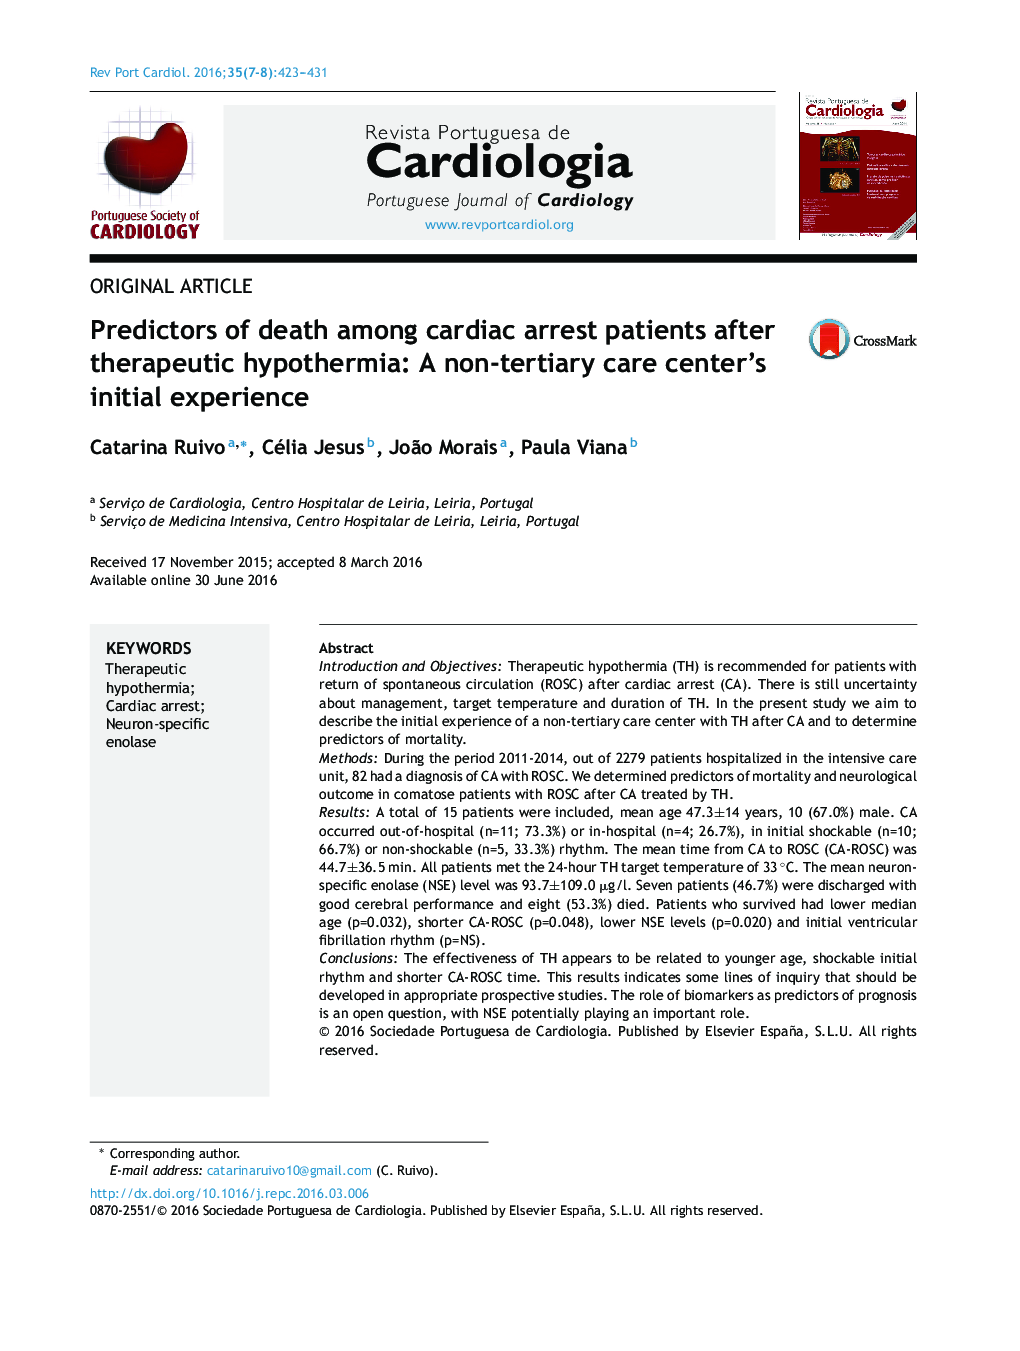 Predictors of death among cardiac arrest patients after therapeutic hypothermia: A non-tertiary care center's initial experience